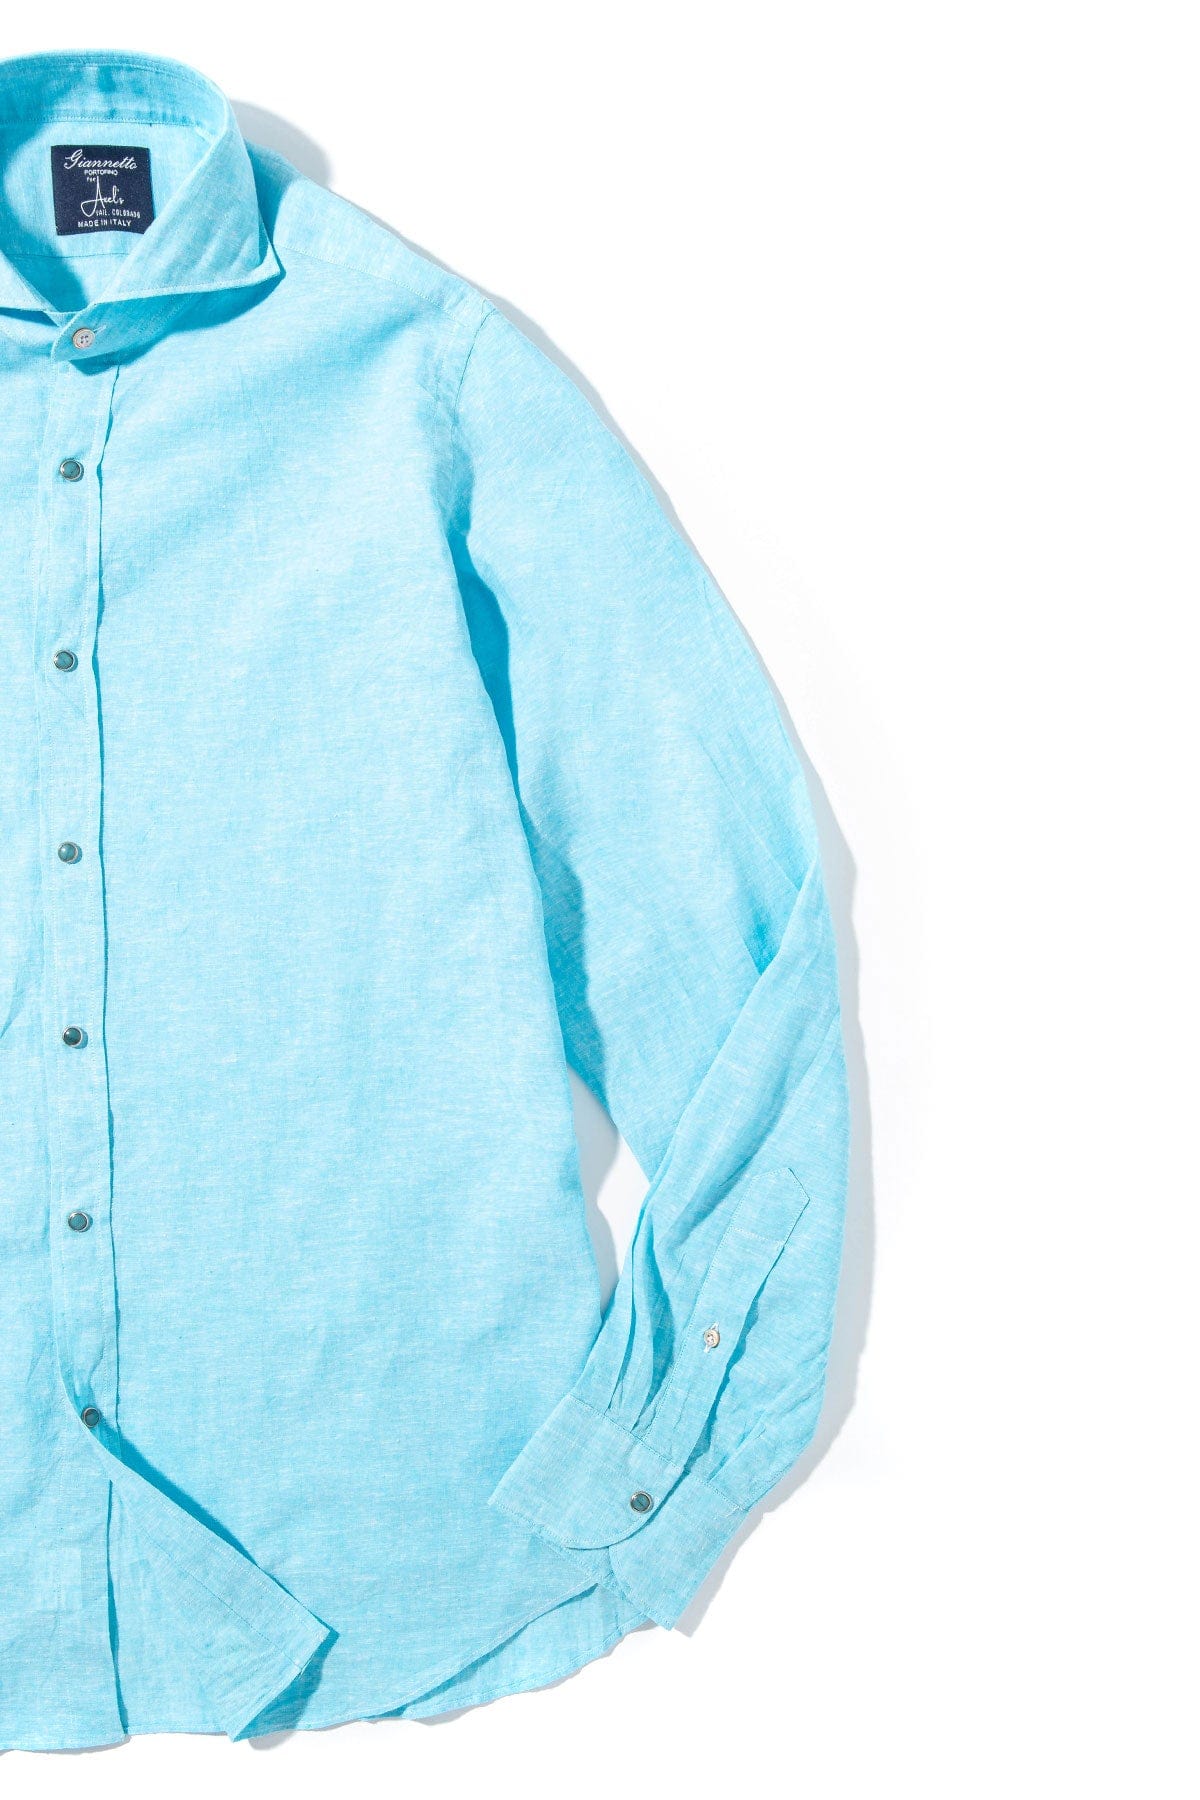 Mach Linen Cotton Snap Shirt in Turquoise - AXEL'S